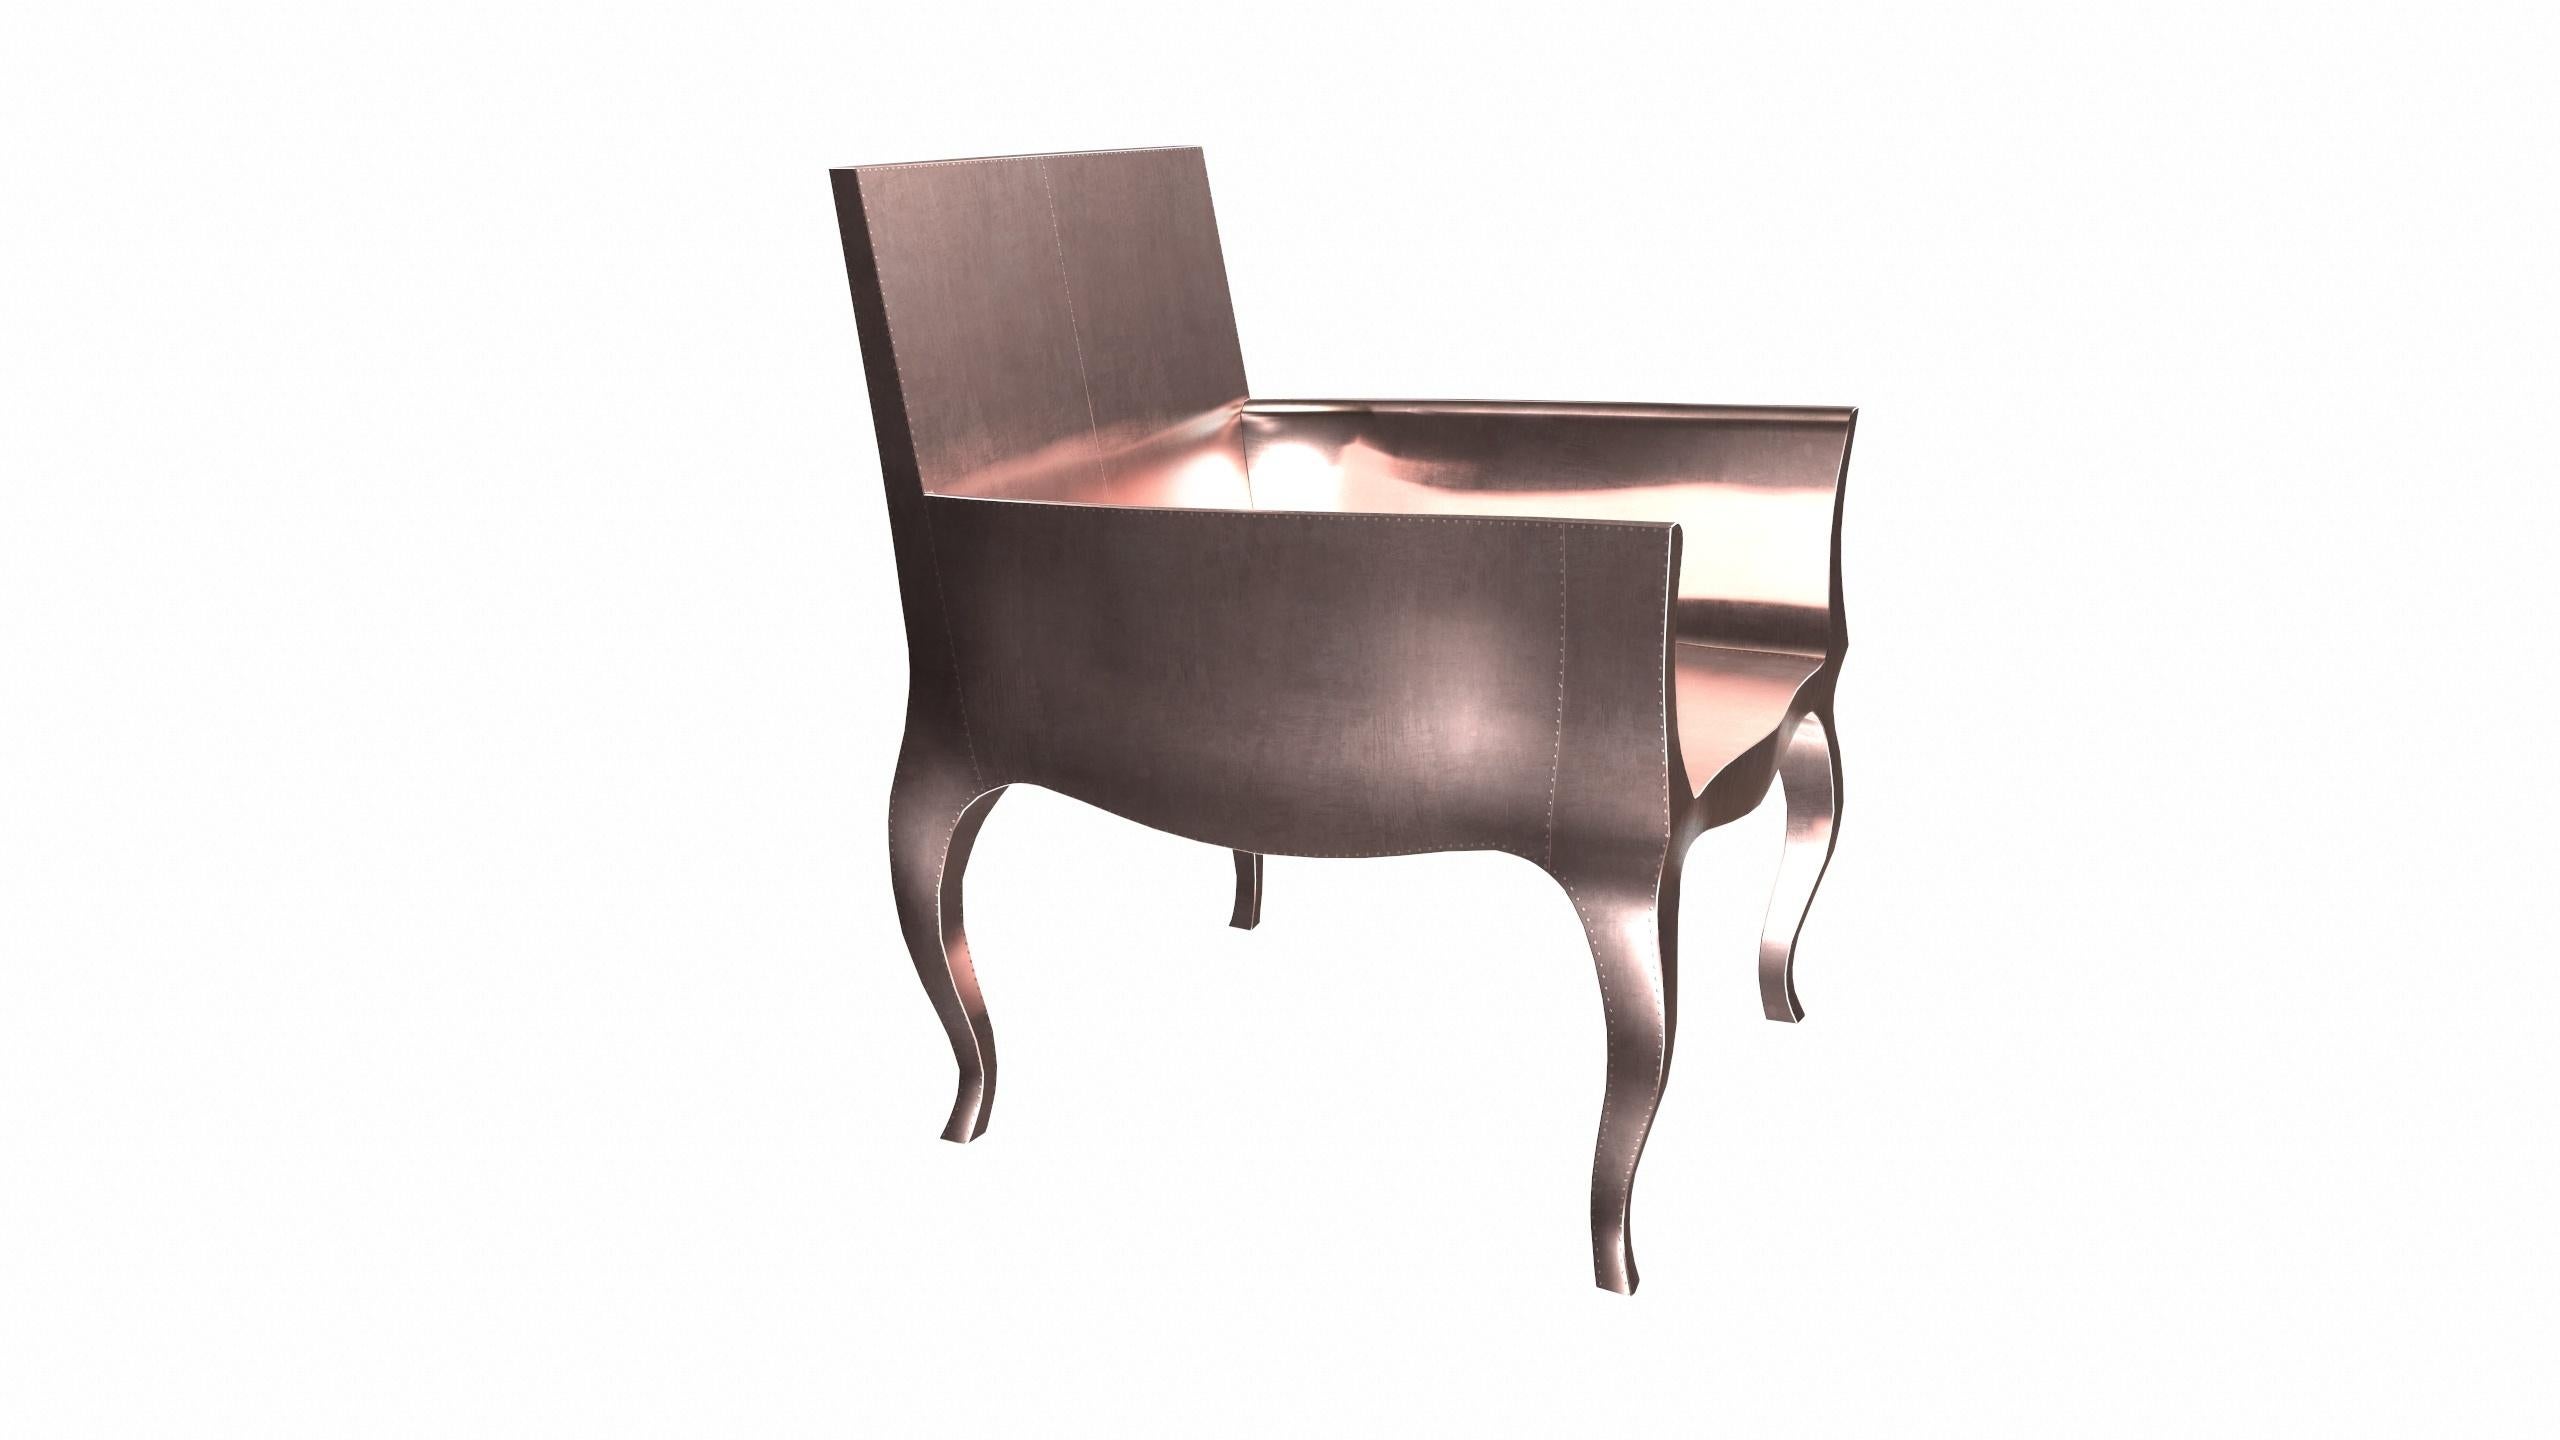 Hand-Carved Art Nouveau Chairs in Smooth Copper by Paul Mathieu for S. Odegard For Sale